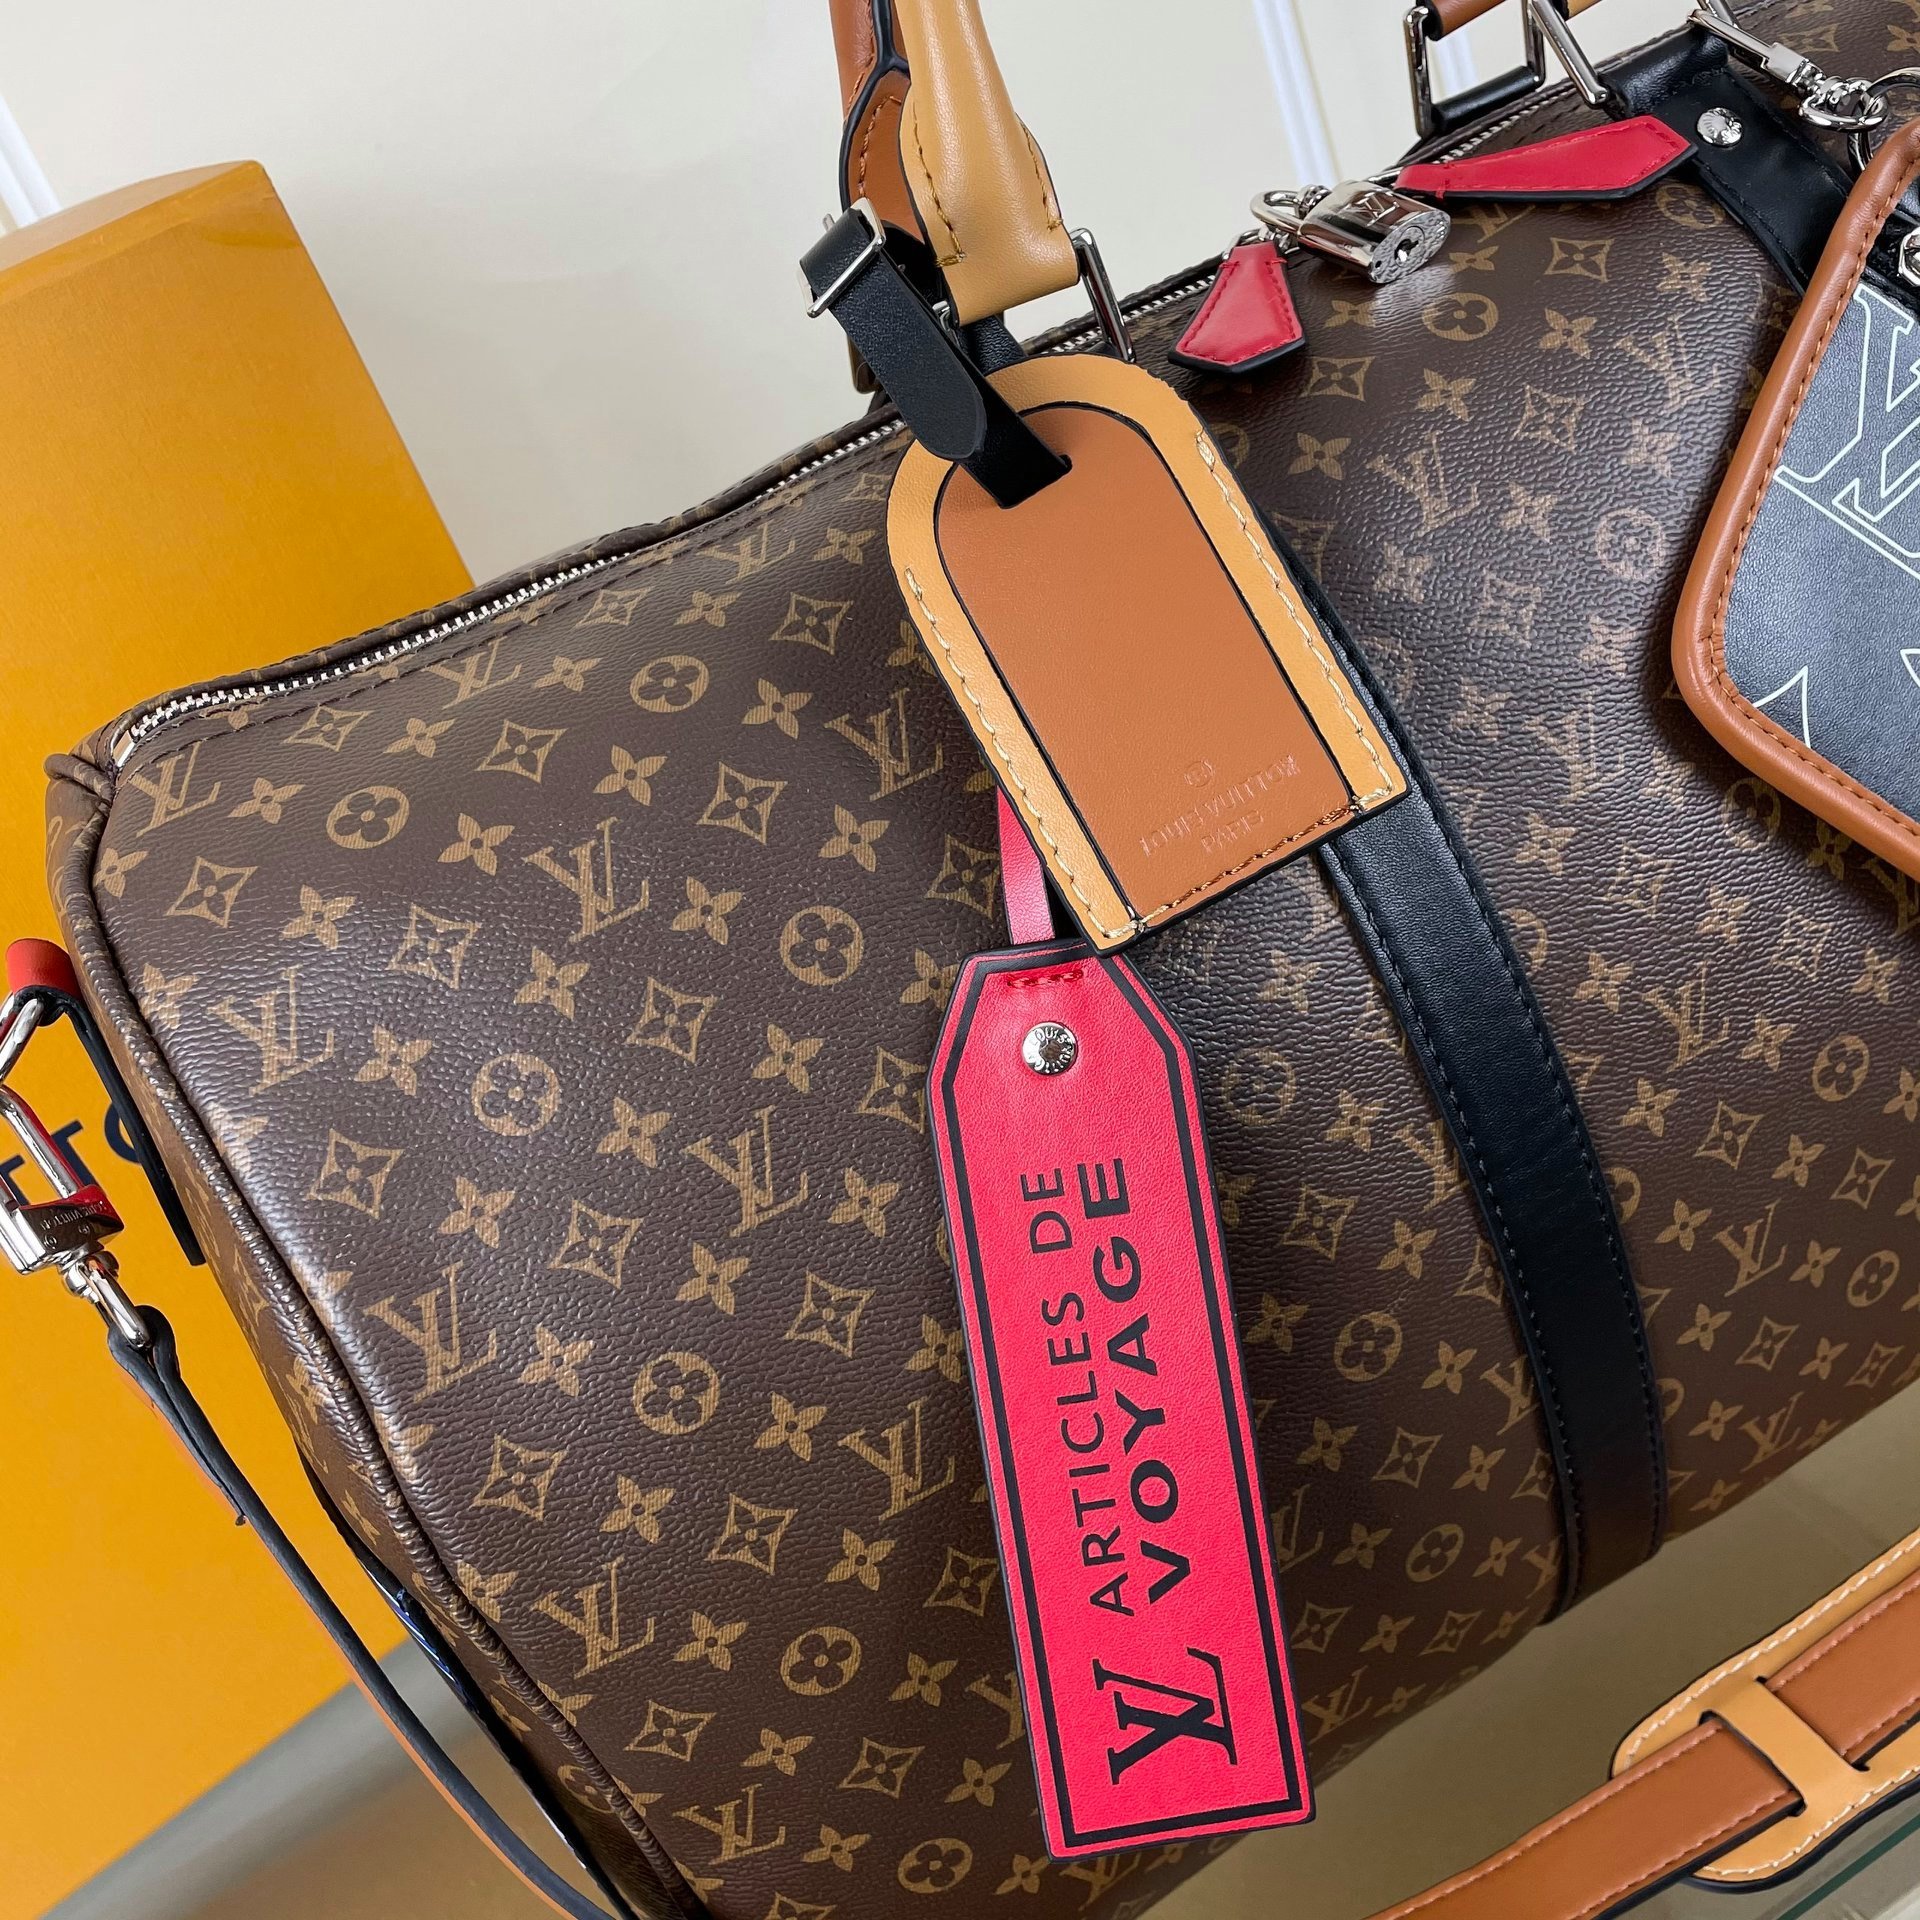 File:Louis Vuitton or shortened to LV, is a French fashion house founded in  1854 by Louis Vuitton Photography by david adam kess, madrid 2016.jpg -  Wikipedia